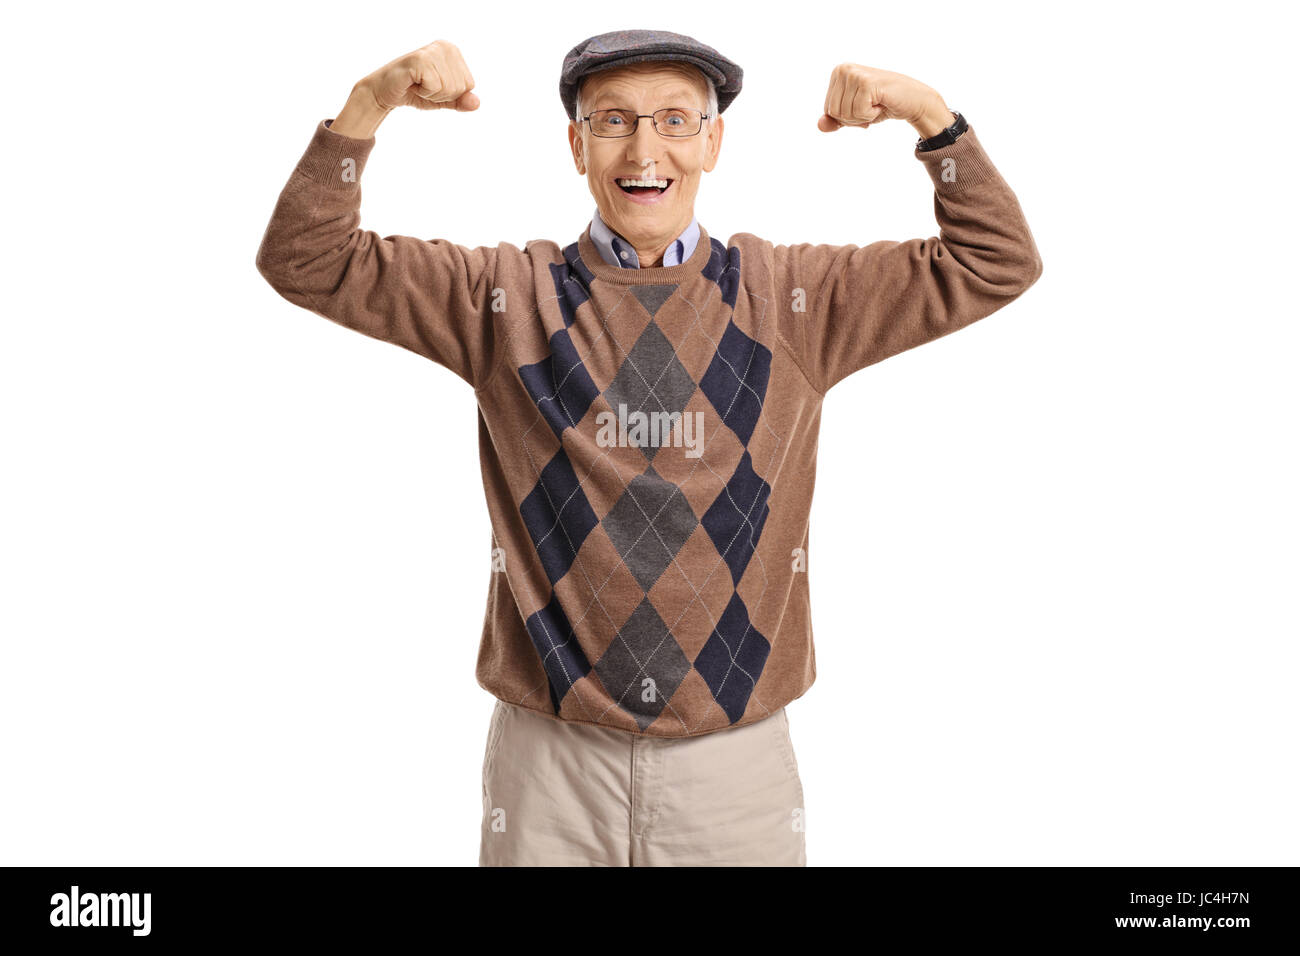 Cheerful senior flexing his muscles and looking at the camera isolated on white background Stock Photo